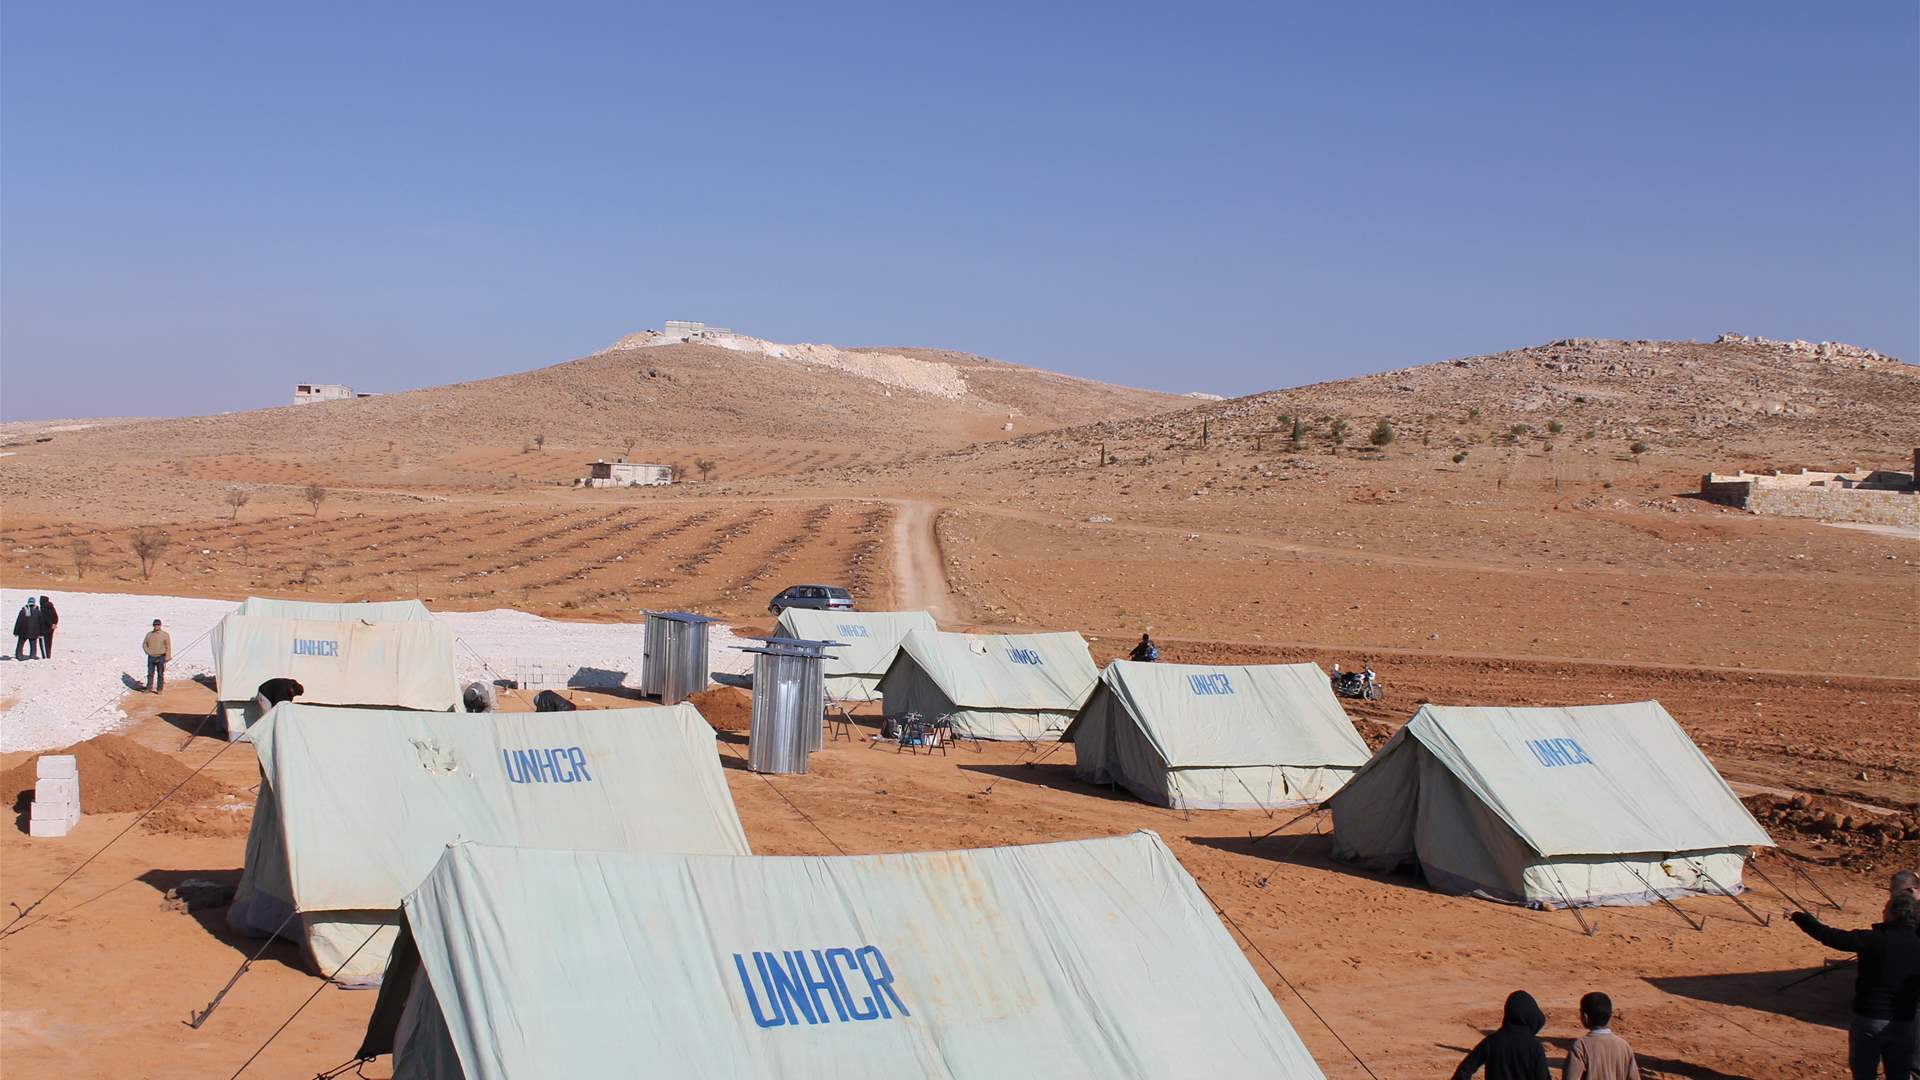 The opposition&#39;s plan: Distributing Syrian refugees across Arab nations and reevaluating the UNHCR&#39;s role